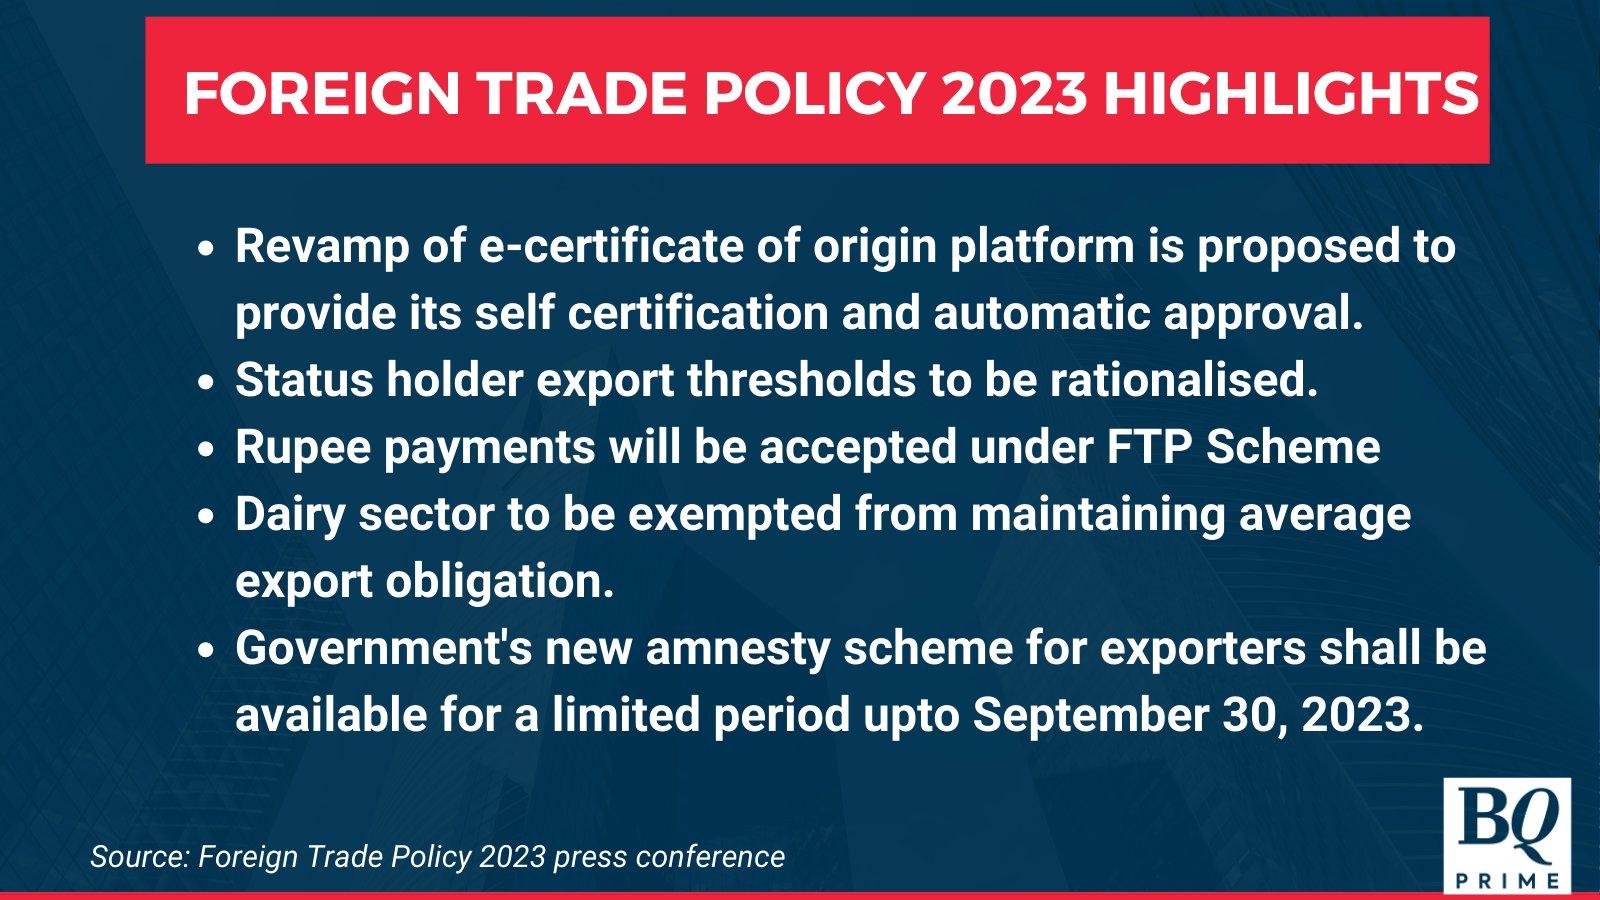 BQ Prime on Twitter: "Finance Minister Piyush Goyal unveils #ForeignTradePolicy2023. This policy will come into effect from April 1, 2023. https://t.co/Eb2f6gRsO7" / Twitter